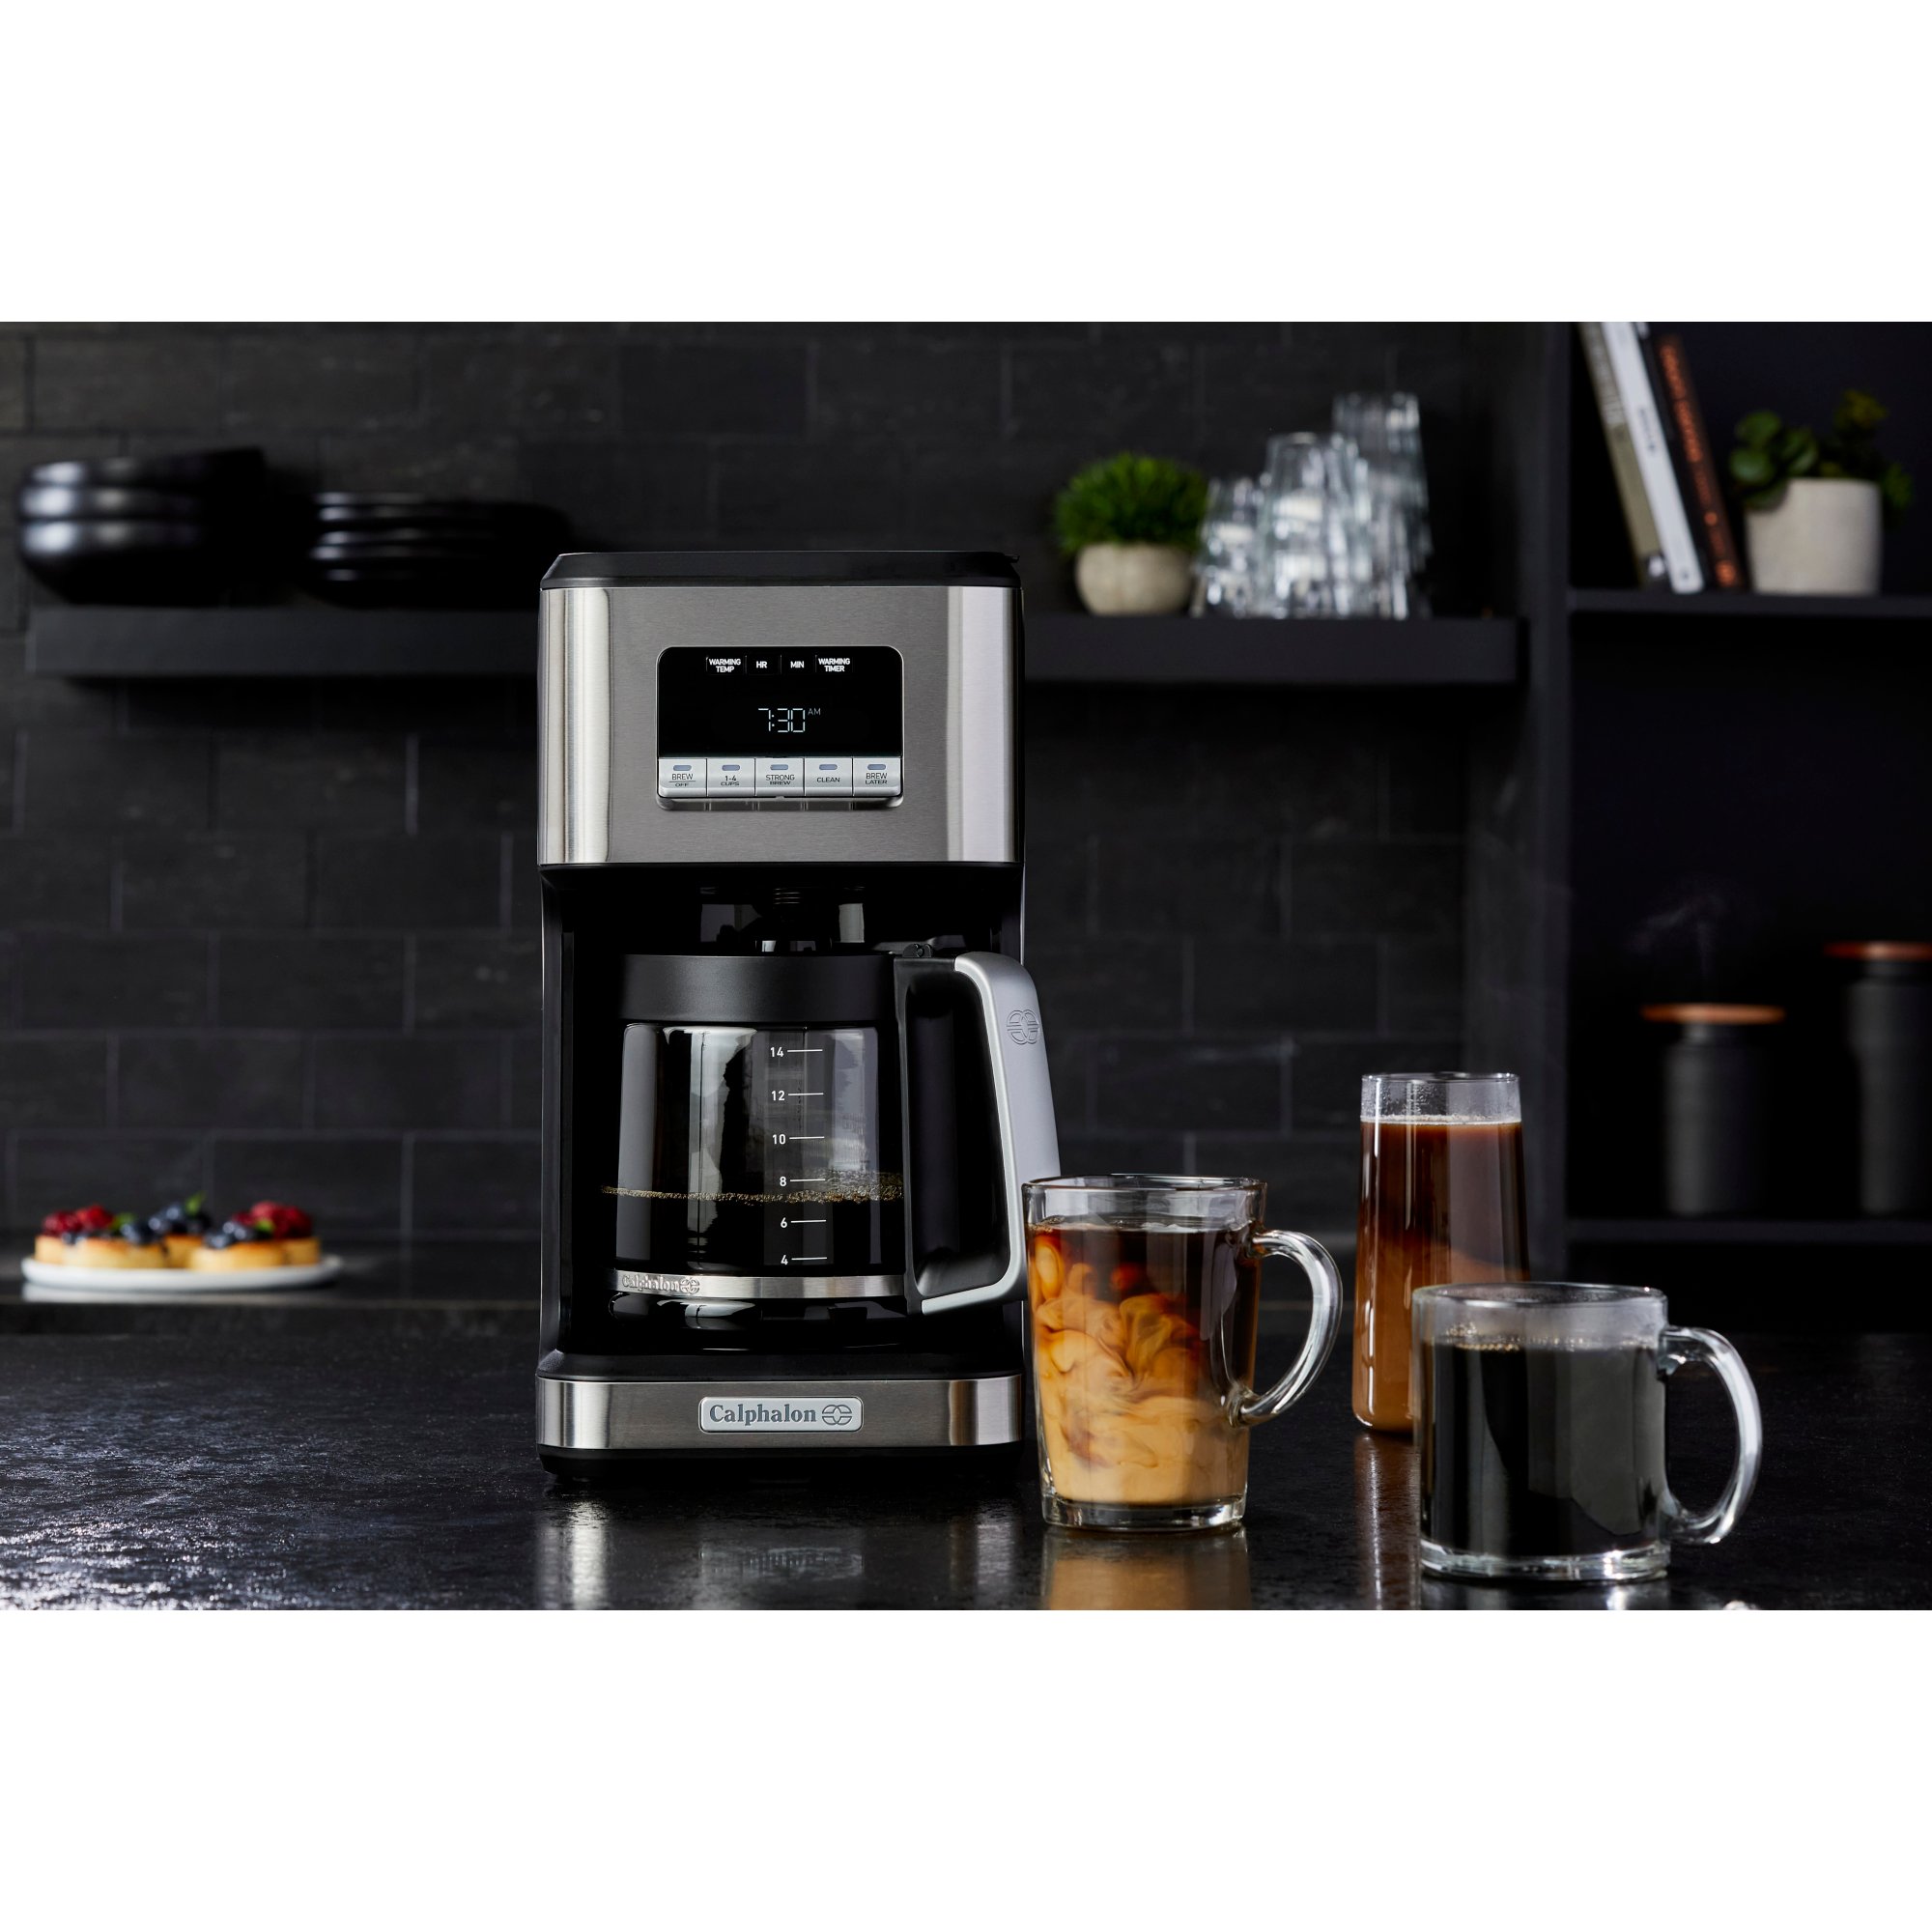 https://newellbrands.scene7.com/is/image/NewellRubbermaid/BVCL-JJ100-A-2120896-calphalon-coffee-maker-with-coffee-cups-lifestyle-2?wid=2000&hei=2000